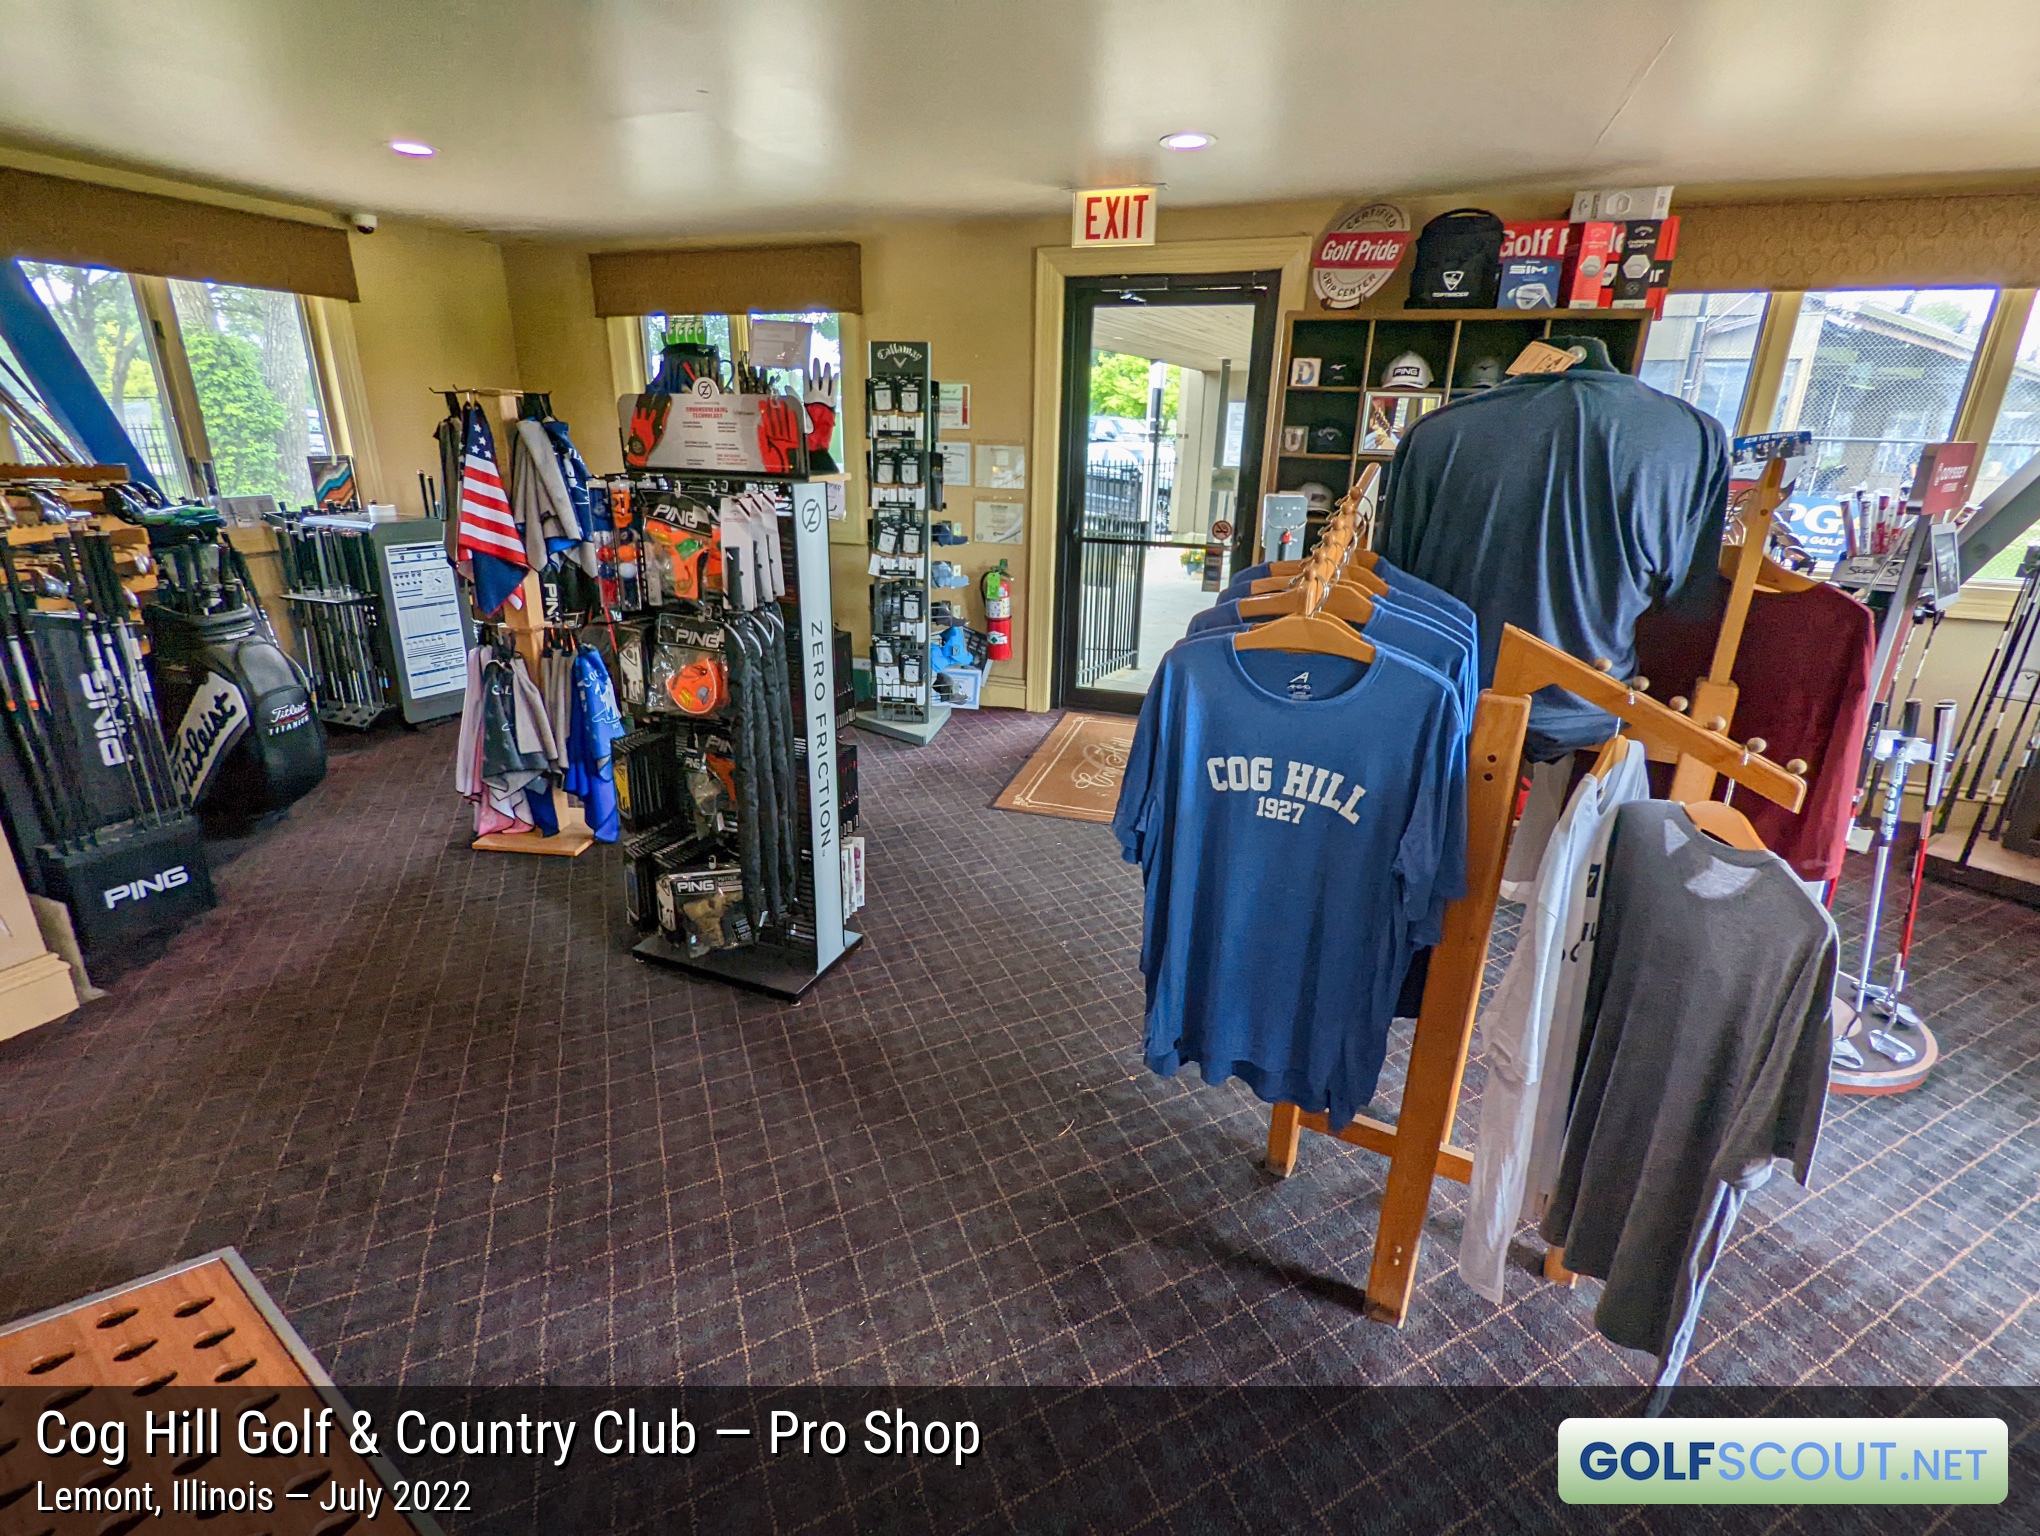 Photo of the pro shop at Cog Hill Course #2 - Ravines in Lemont, Illinois. The pro shop at the driving range is the smallest of the three pro shops.